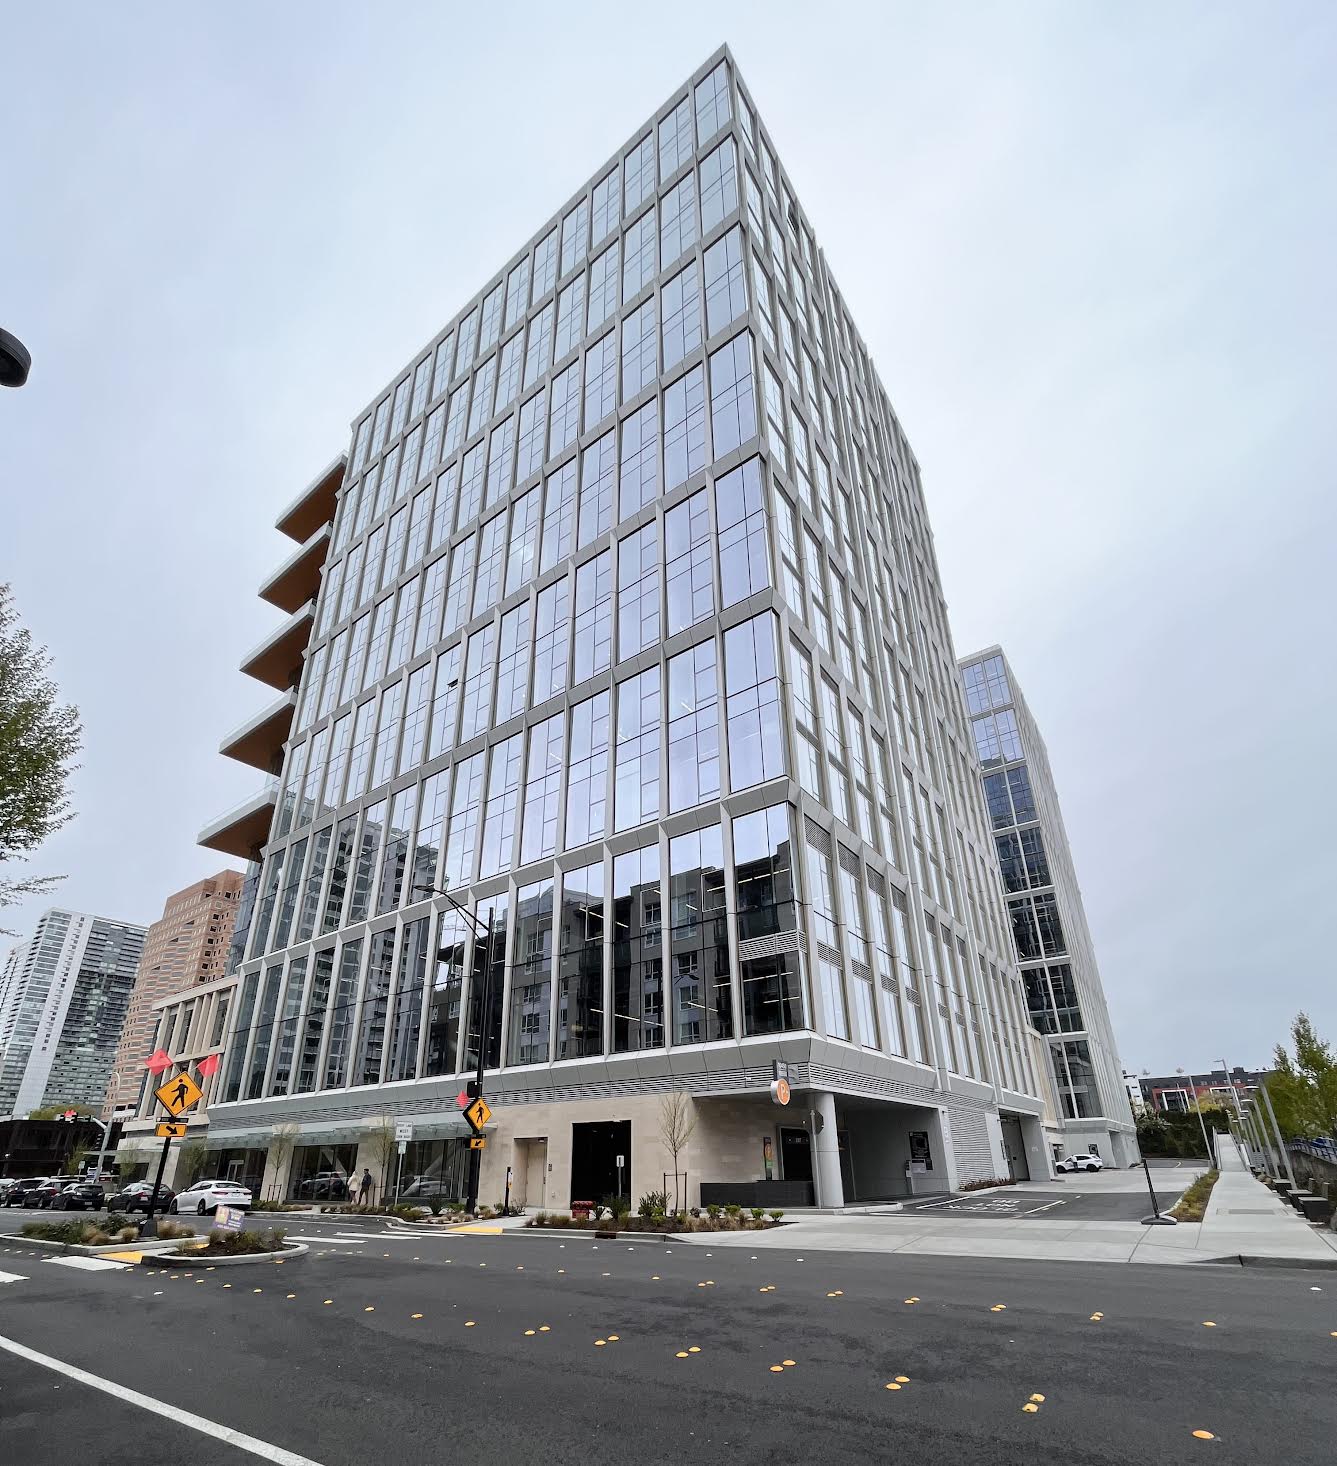 Amazon’s Binary Towers in Bellevue Now Open, Slated for 2,000 Employees